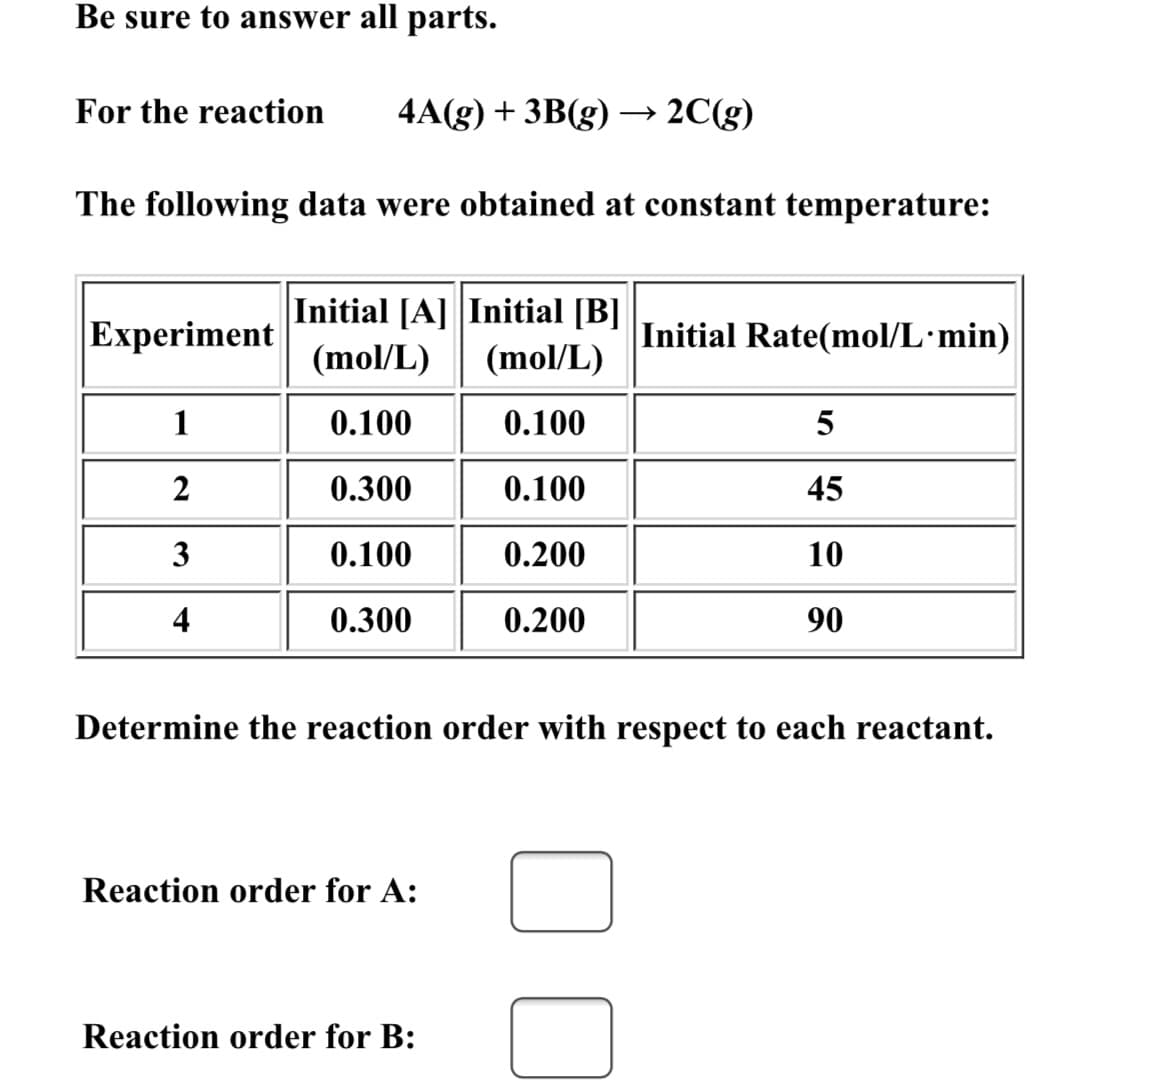 Be sure to answer all parts.
For the reaction
4A(g) + 3B(g) → 2C(g)
The following data were obtained at constant temperature:
Experiment
Initial [A] Initial [B]
(mol/L)
Initial Rate(mol/L•min)
(mol/L)
1
0.100
0.100
5
2
0.300
0.100
45
3
0.100
0.200
10
4
0.300
0.200
90
Determine the reaction order with respect to each reactant.
Reaction order for A:
Reaction order for B:
